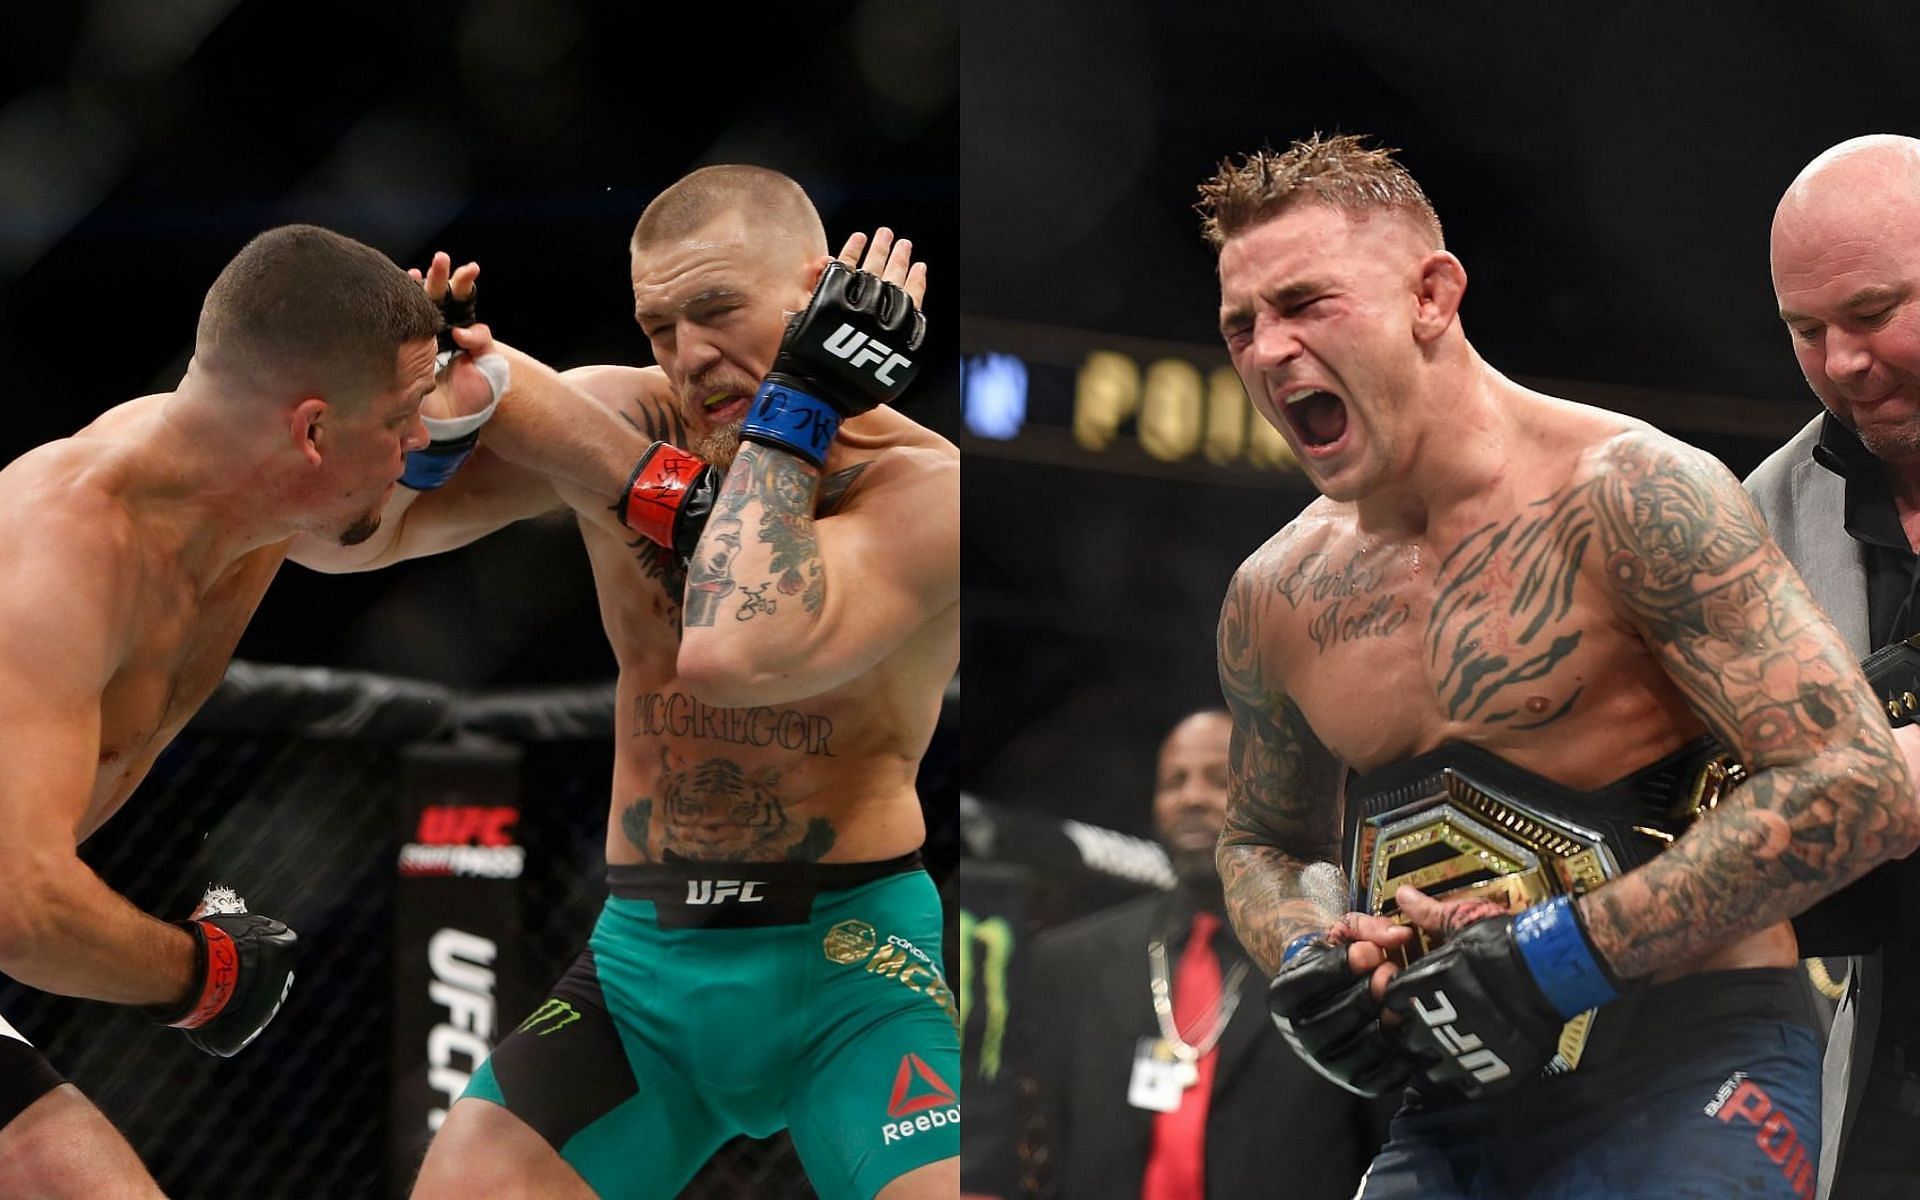 Dustin Poirier reveals that his daughter was born on the same day as Conor McGregor vs Nate Diaz 2 at UFC 202